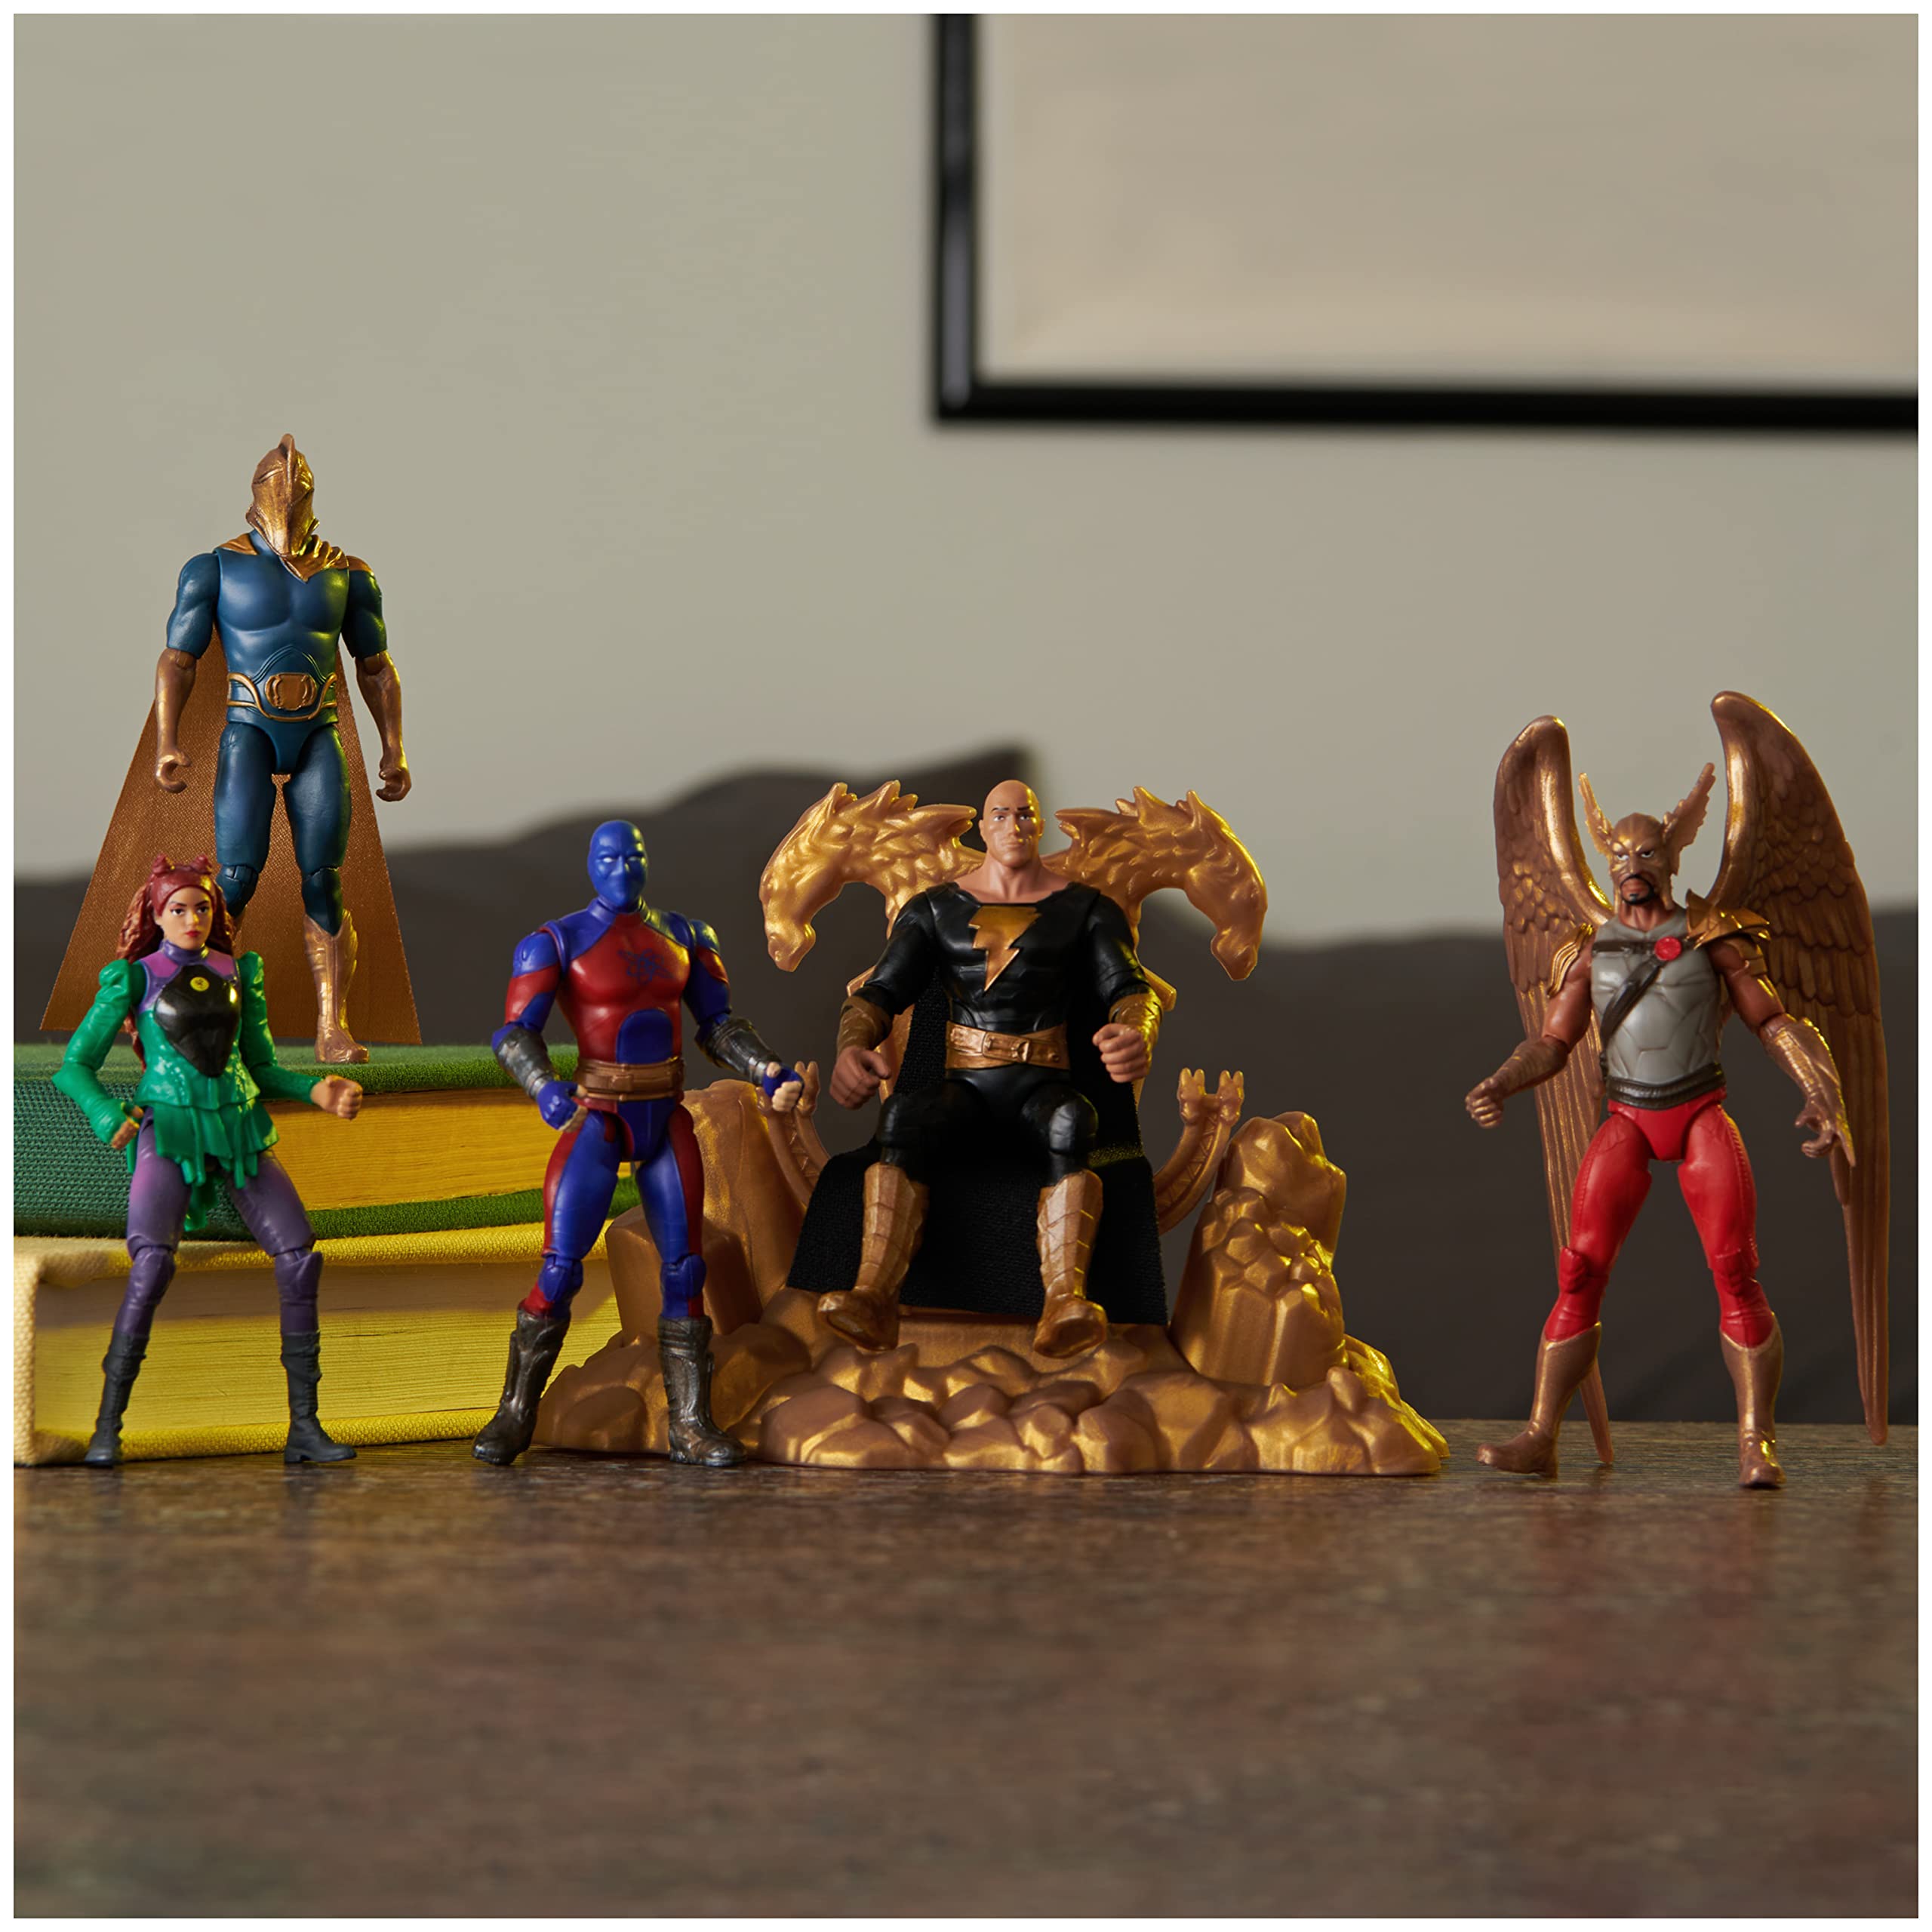 DC Comics, Black Adam and Justice Society Set, 4-inch Black Adam Toy Figures and Throne | Hawkman, Dr. Fate, Atom Smasher, Cyclone | Kids Toys for Boys and Girls Ages 3 and Up (Amazon Exclusive)